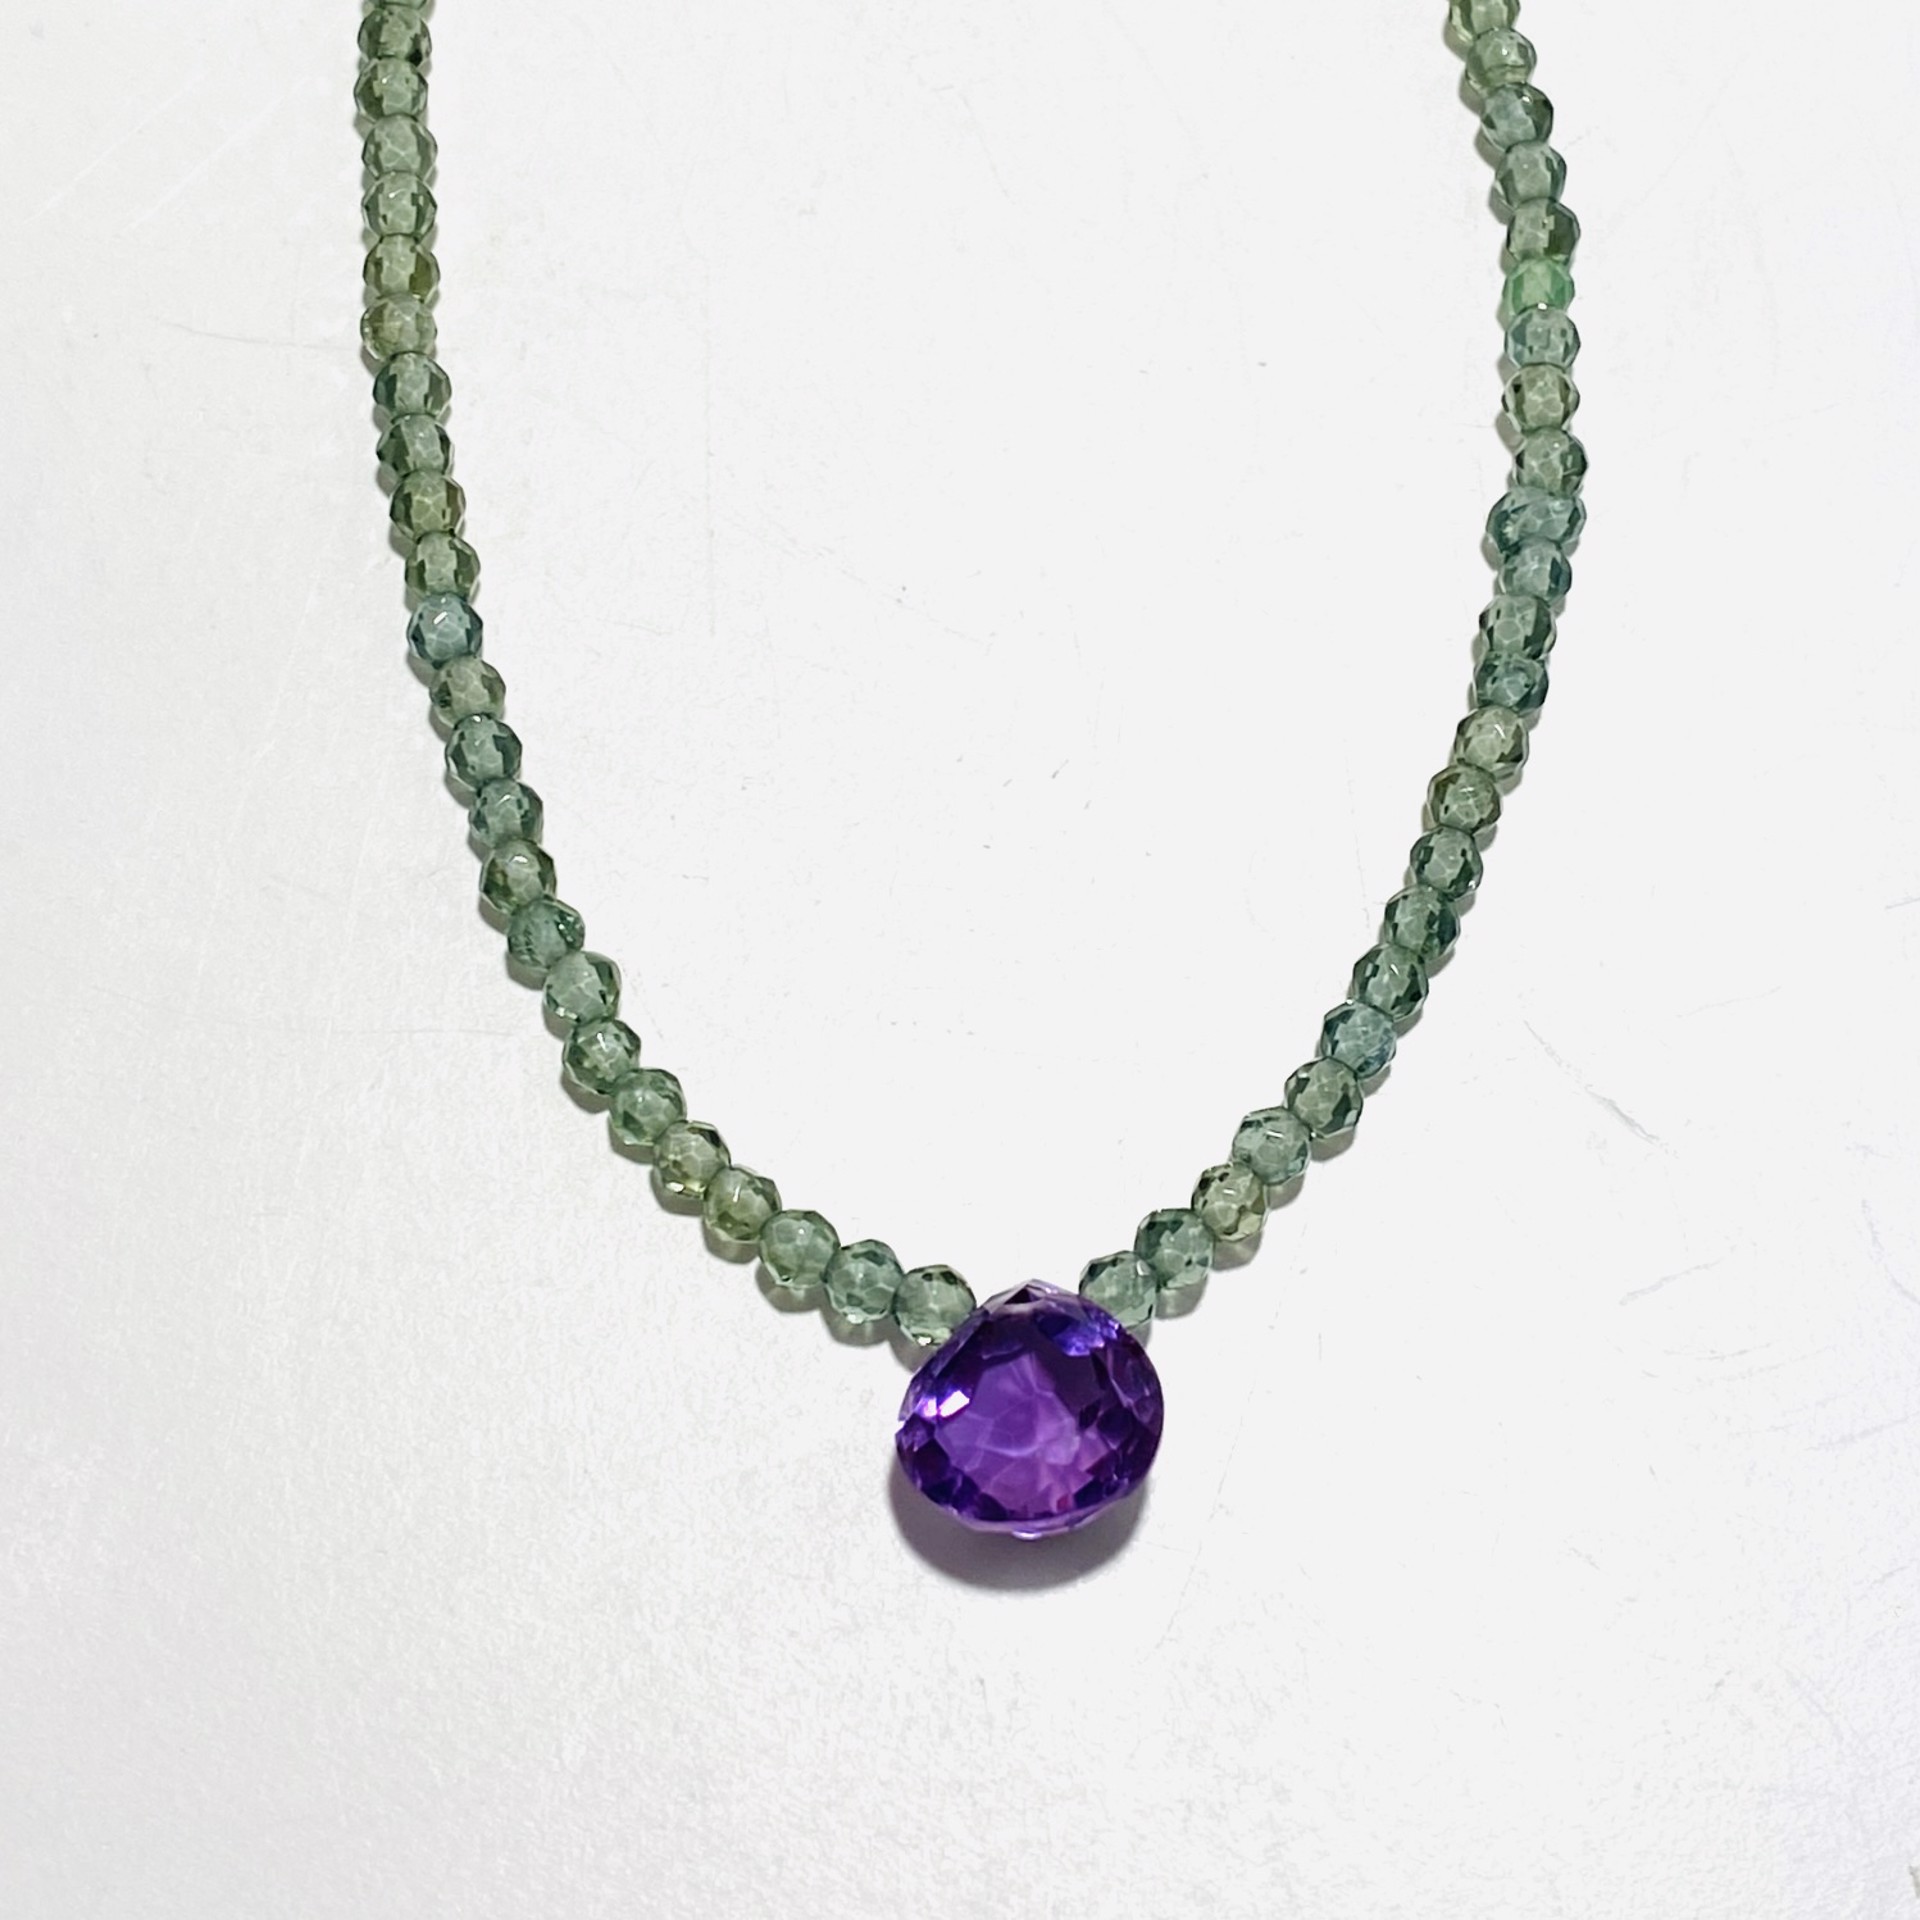 NT23-46 Faceted Tiny Green Apatite Fancy Cut Amethyst Focal Necklace by Nance Trueworthy